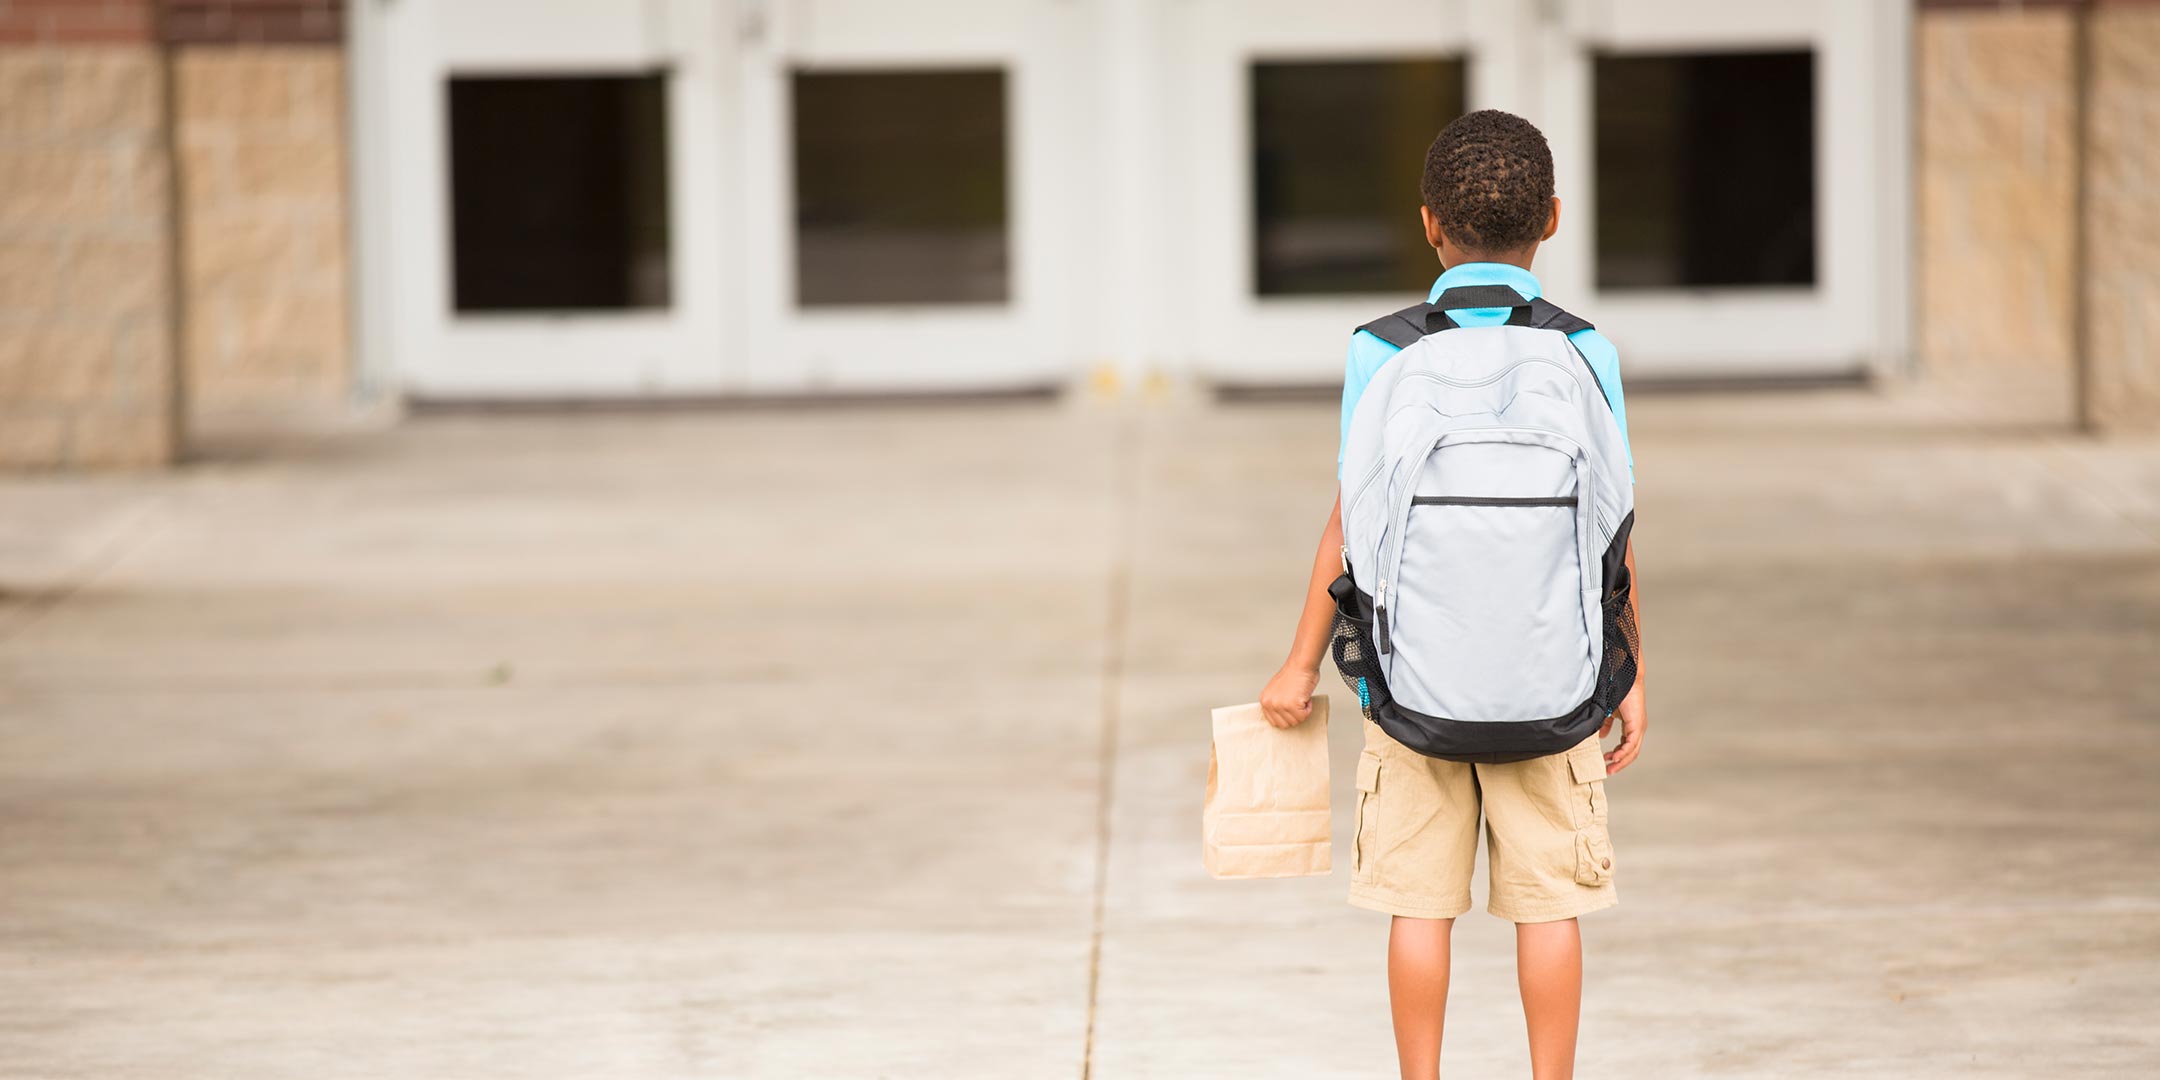 Managing "Scared" at the Start of School: How Parents and Teachers Can Help